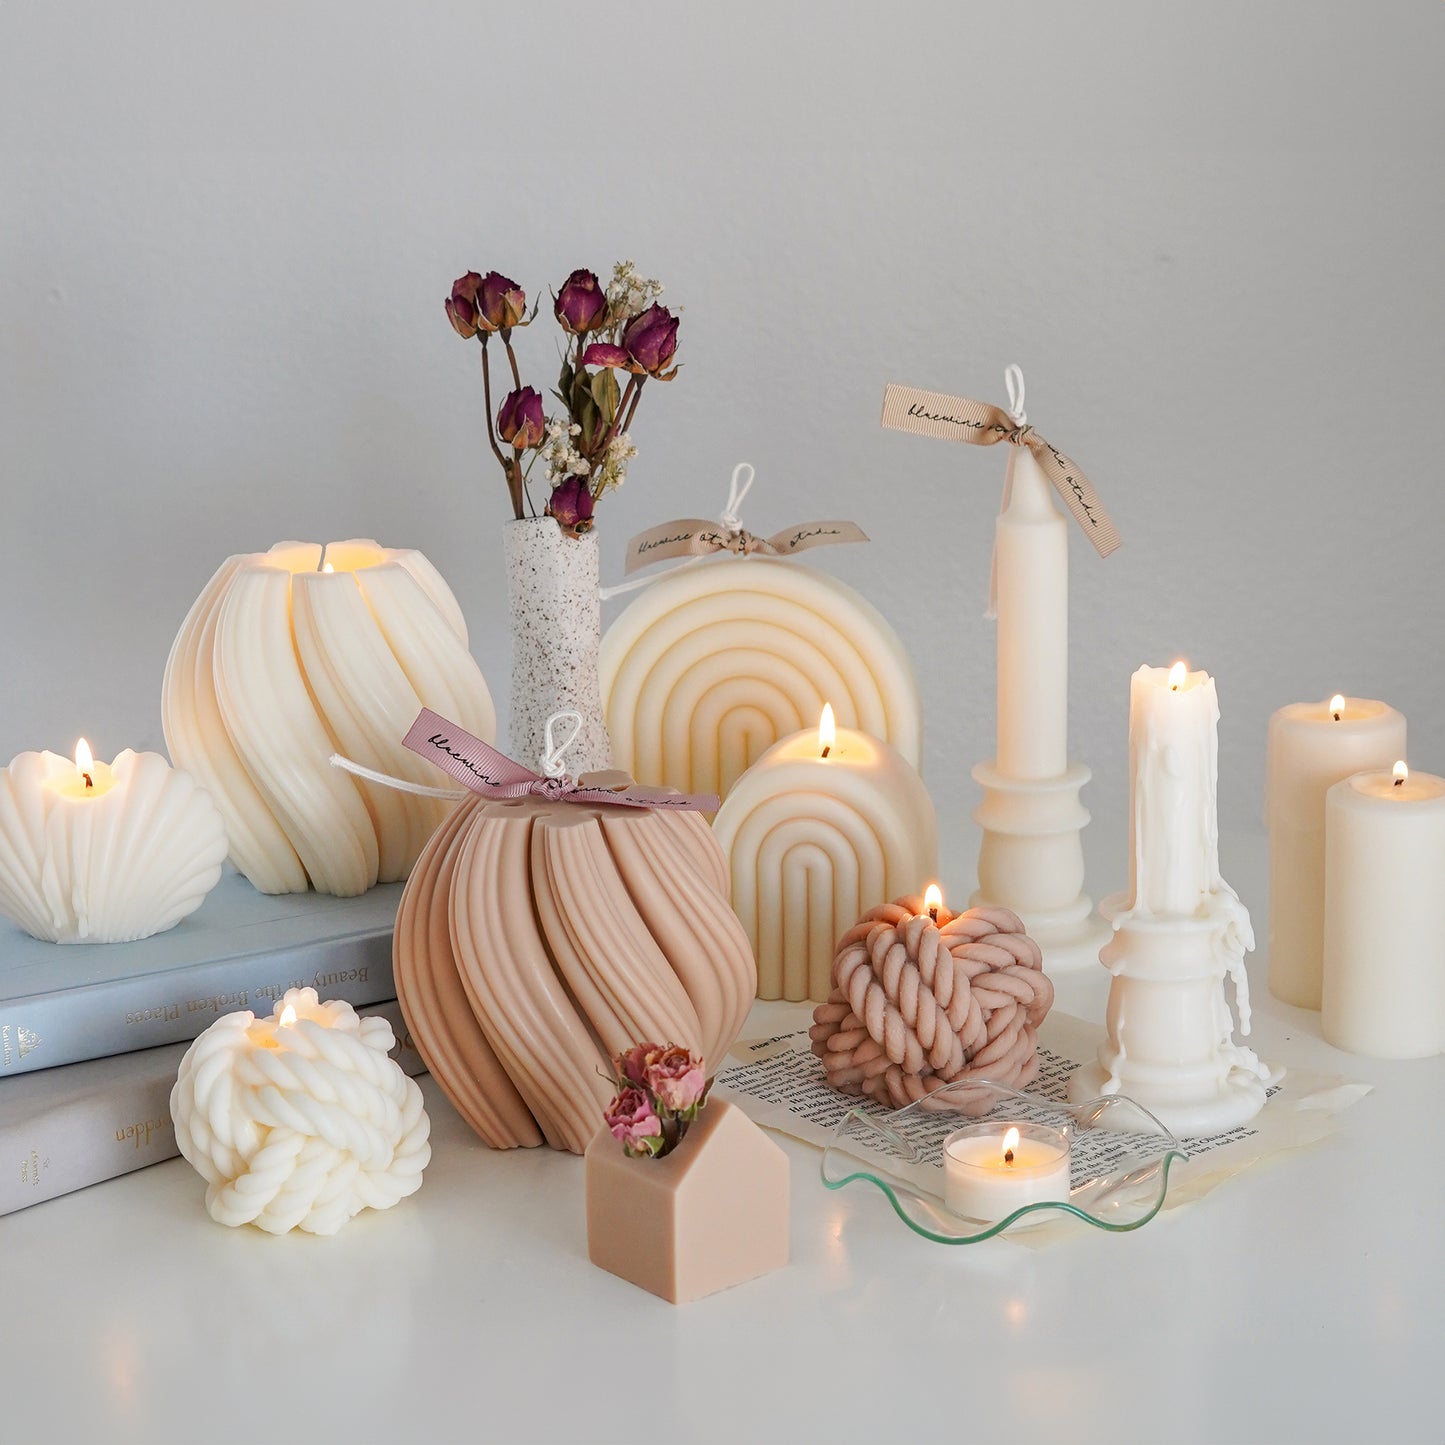 white and beige minimal sculptural soy pillar candle collections with burgundy dried flowers on the white round table